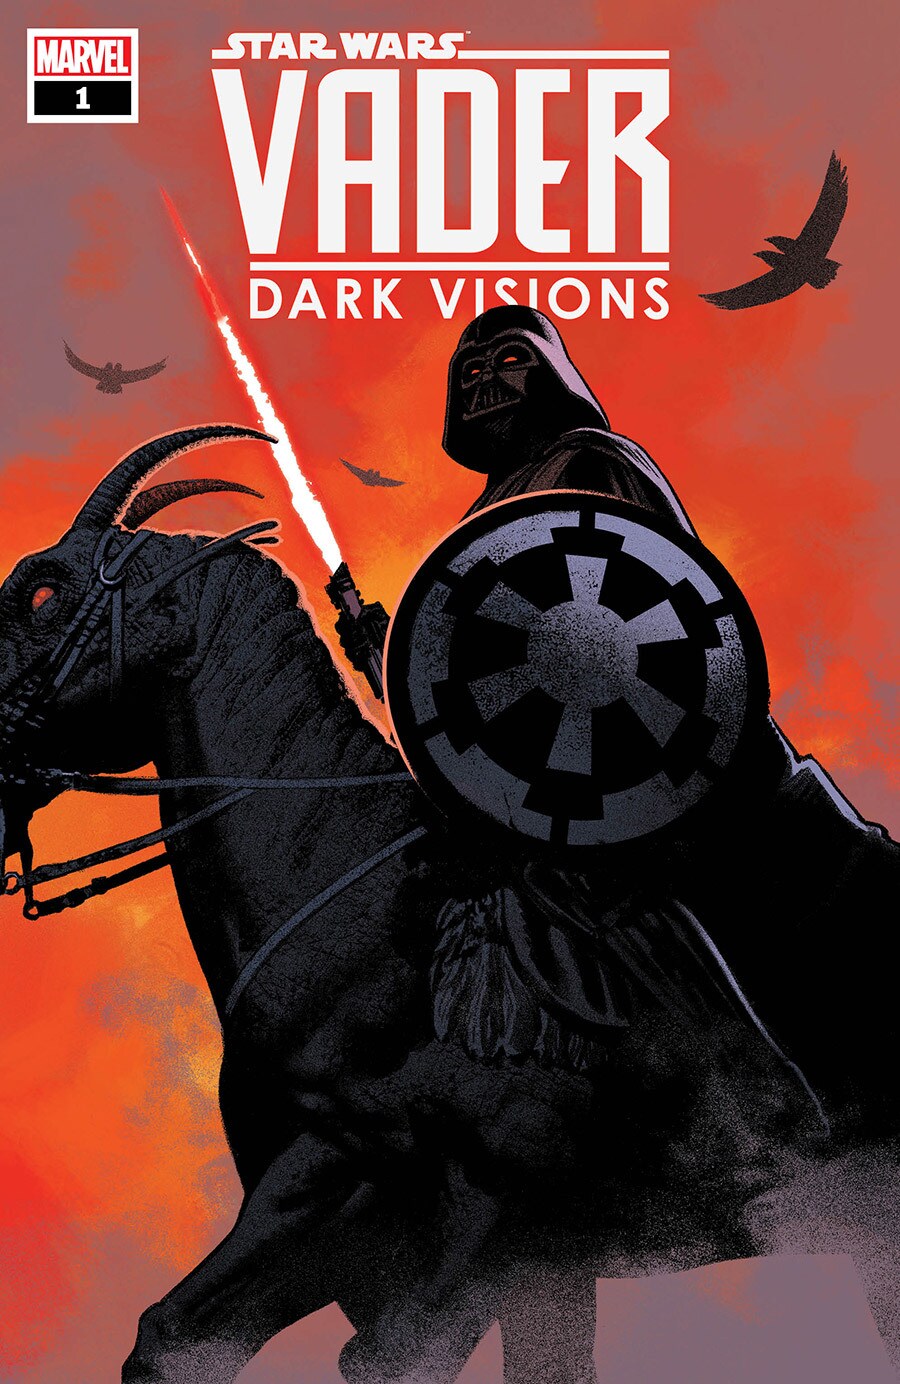 The cover of Vader - Dark Visions issue 1.